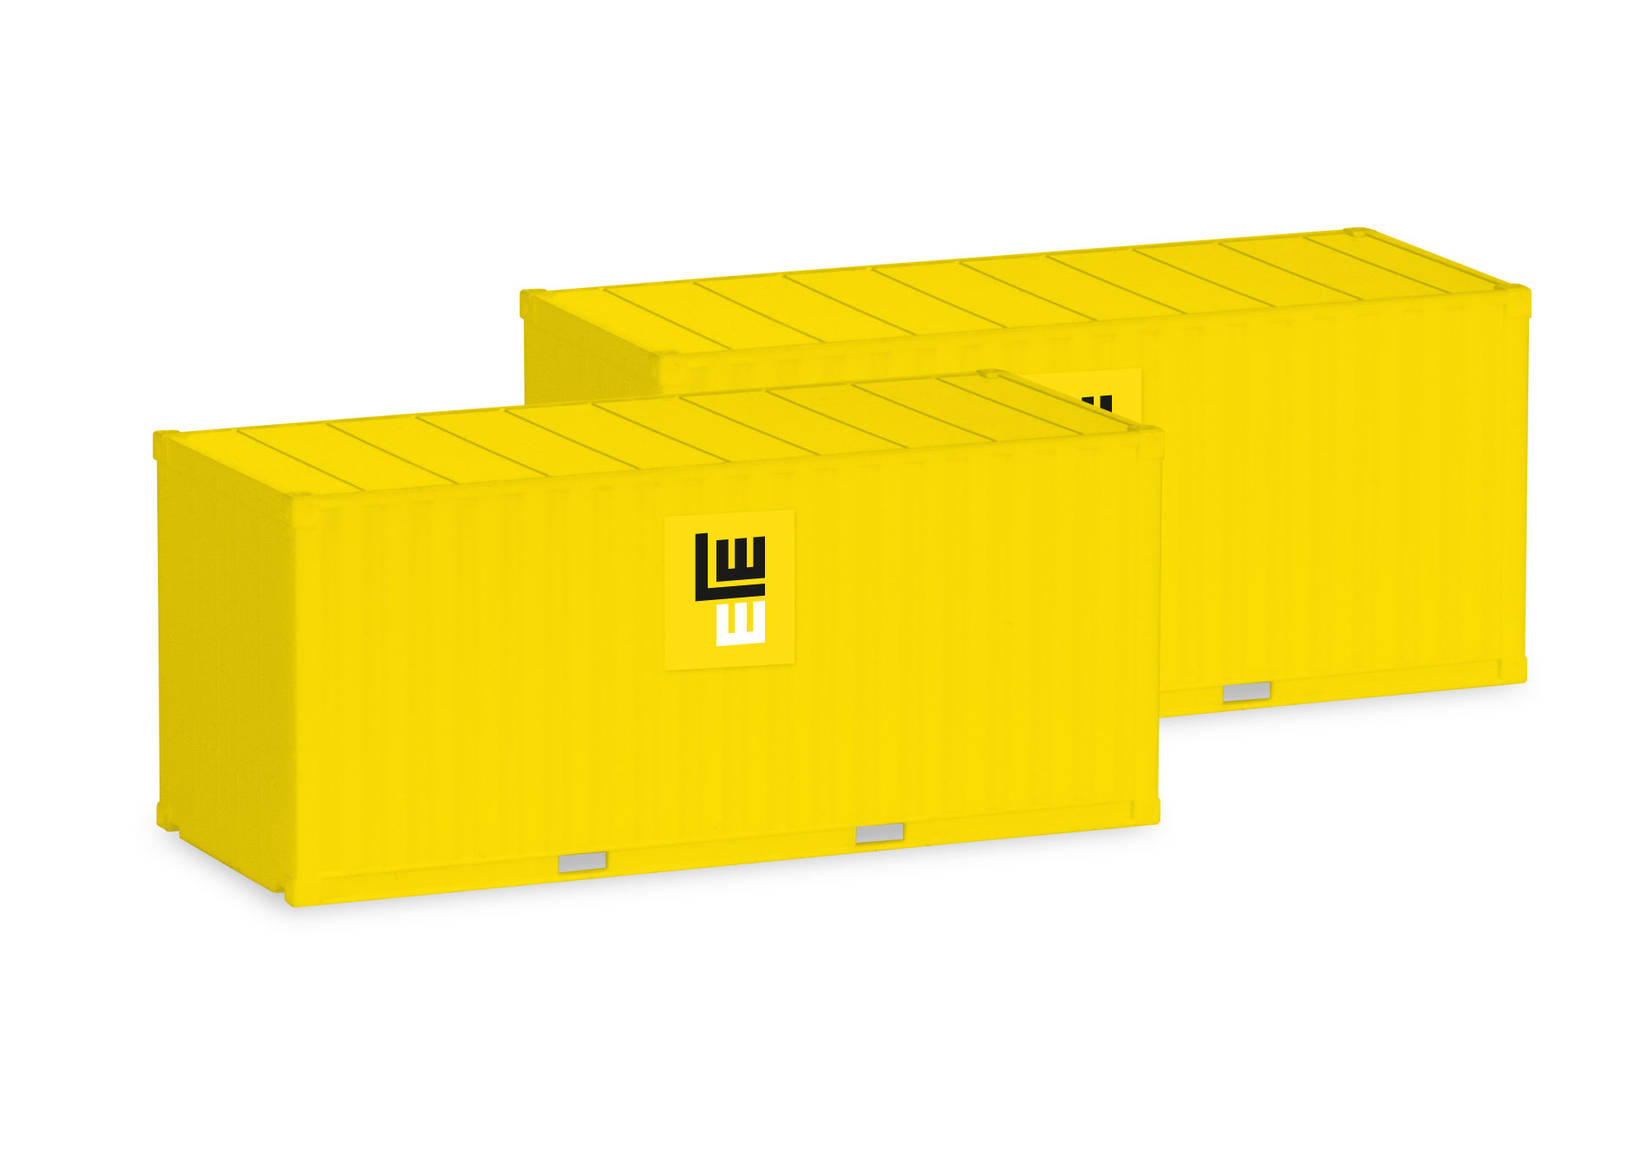 2 x 20 ft. Container "Leonhard Weiss"